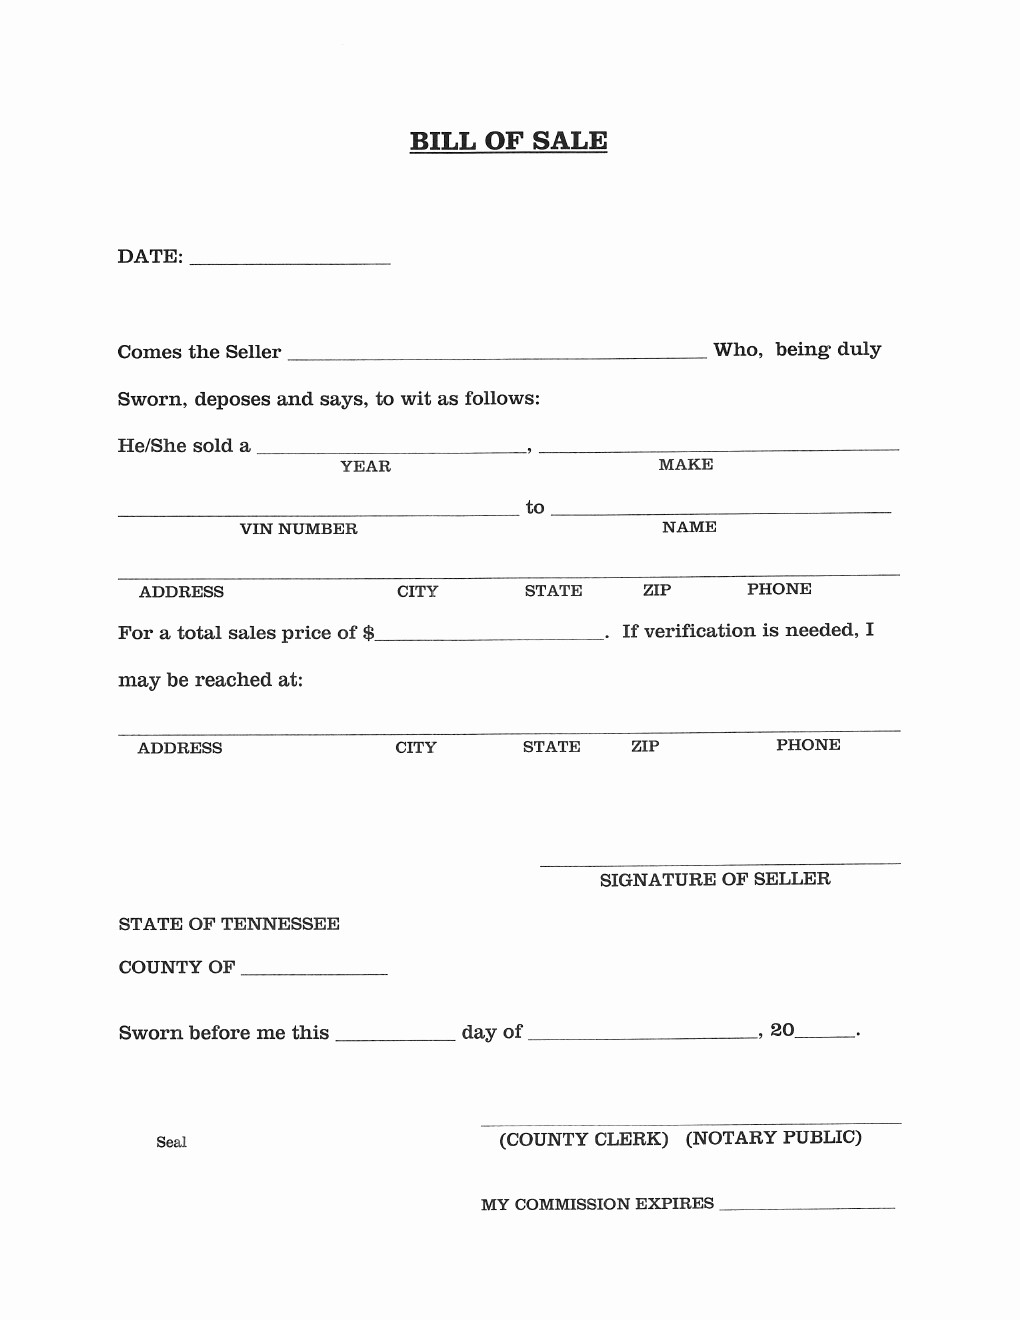 Motorcycle Bill Of Sale Printable Elegant Free Tennessee Vehicle Bill Of Sale form Download Pdf